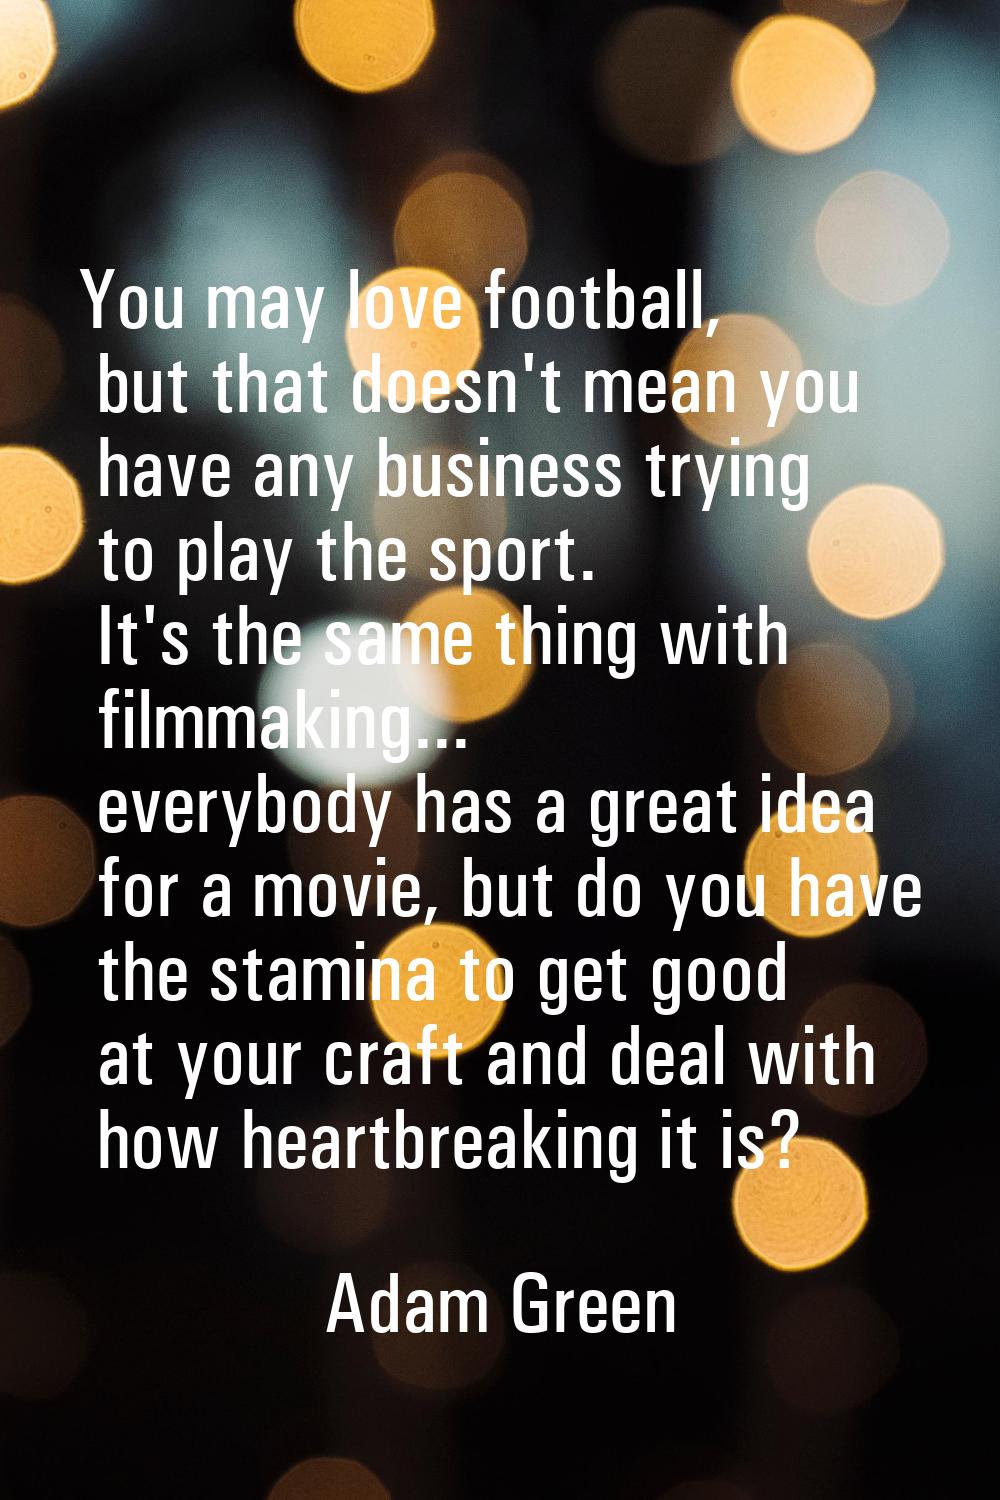 You may love football, but that doesn't mean you have any business trying to play the sport. It's t